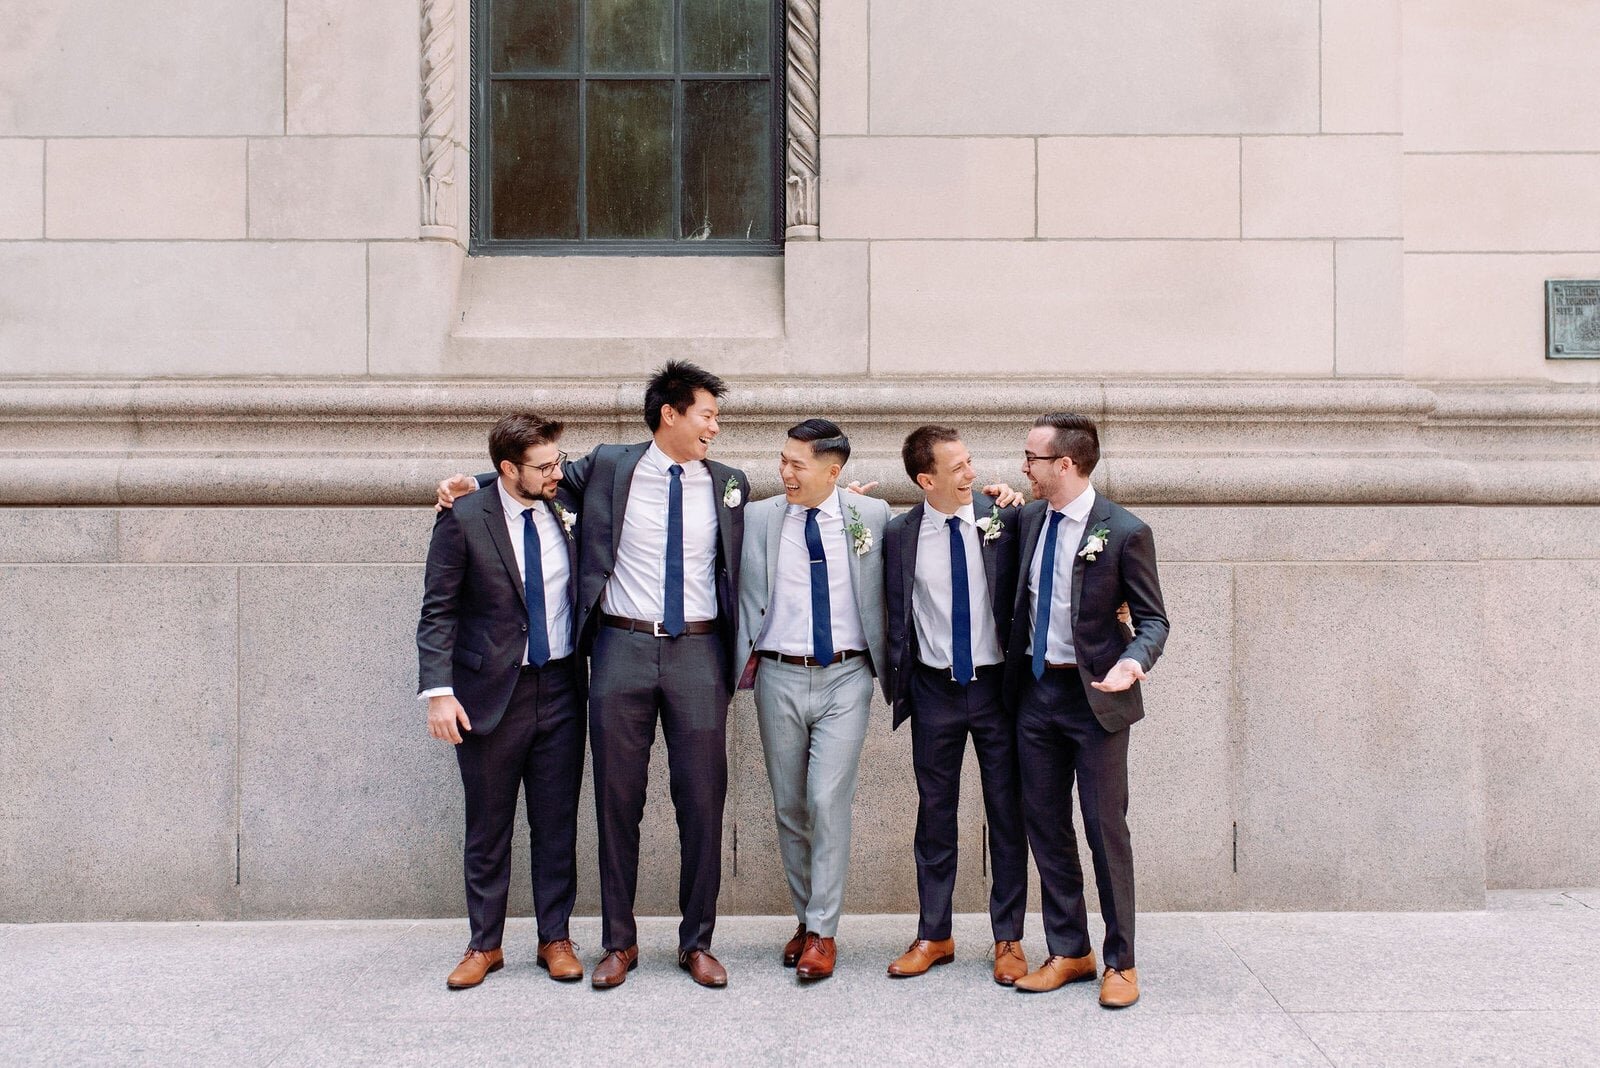 Candid moment Groom with his groomsmen toronto financial district downtown toronto wedding jacqueline james photography